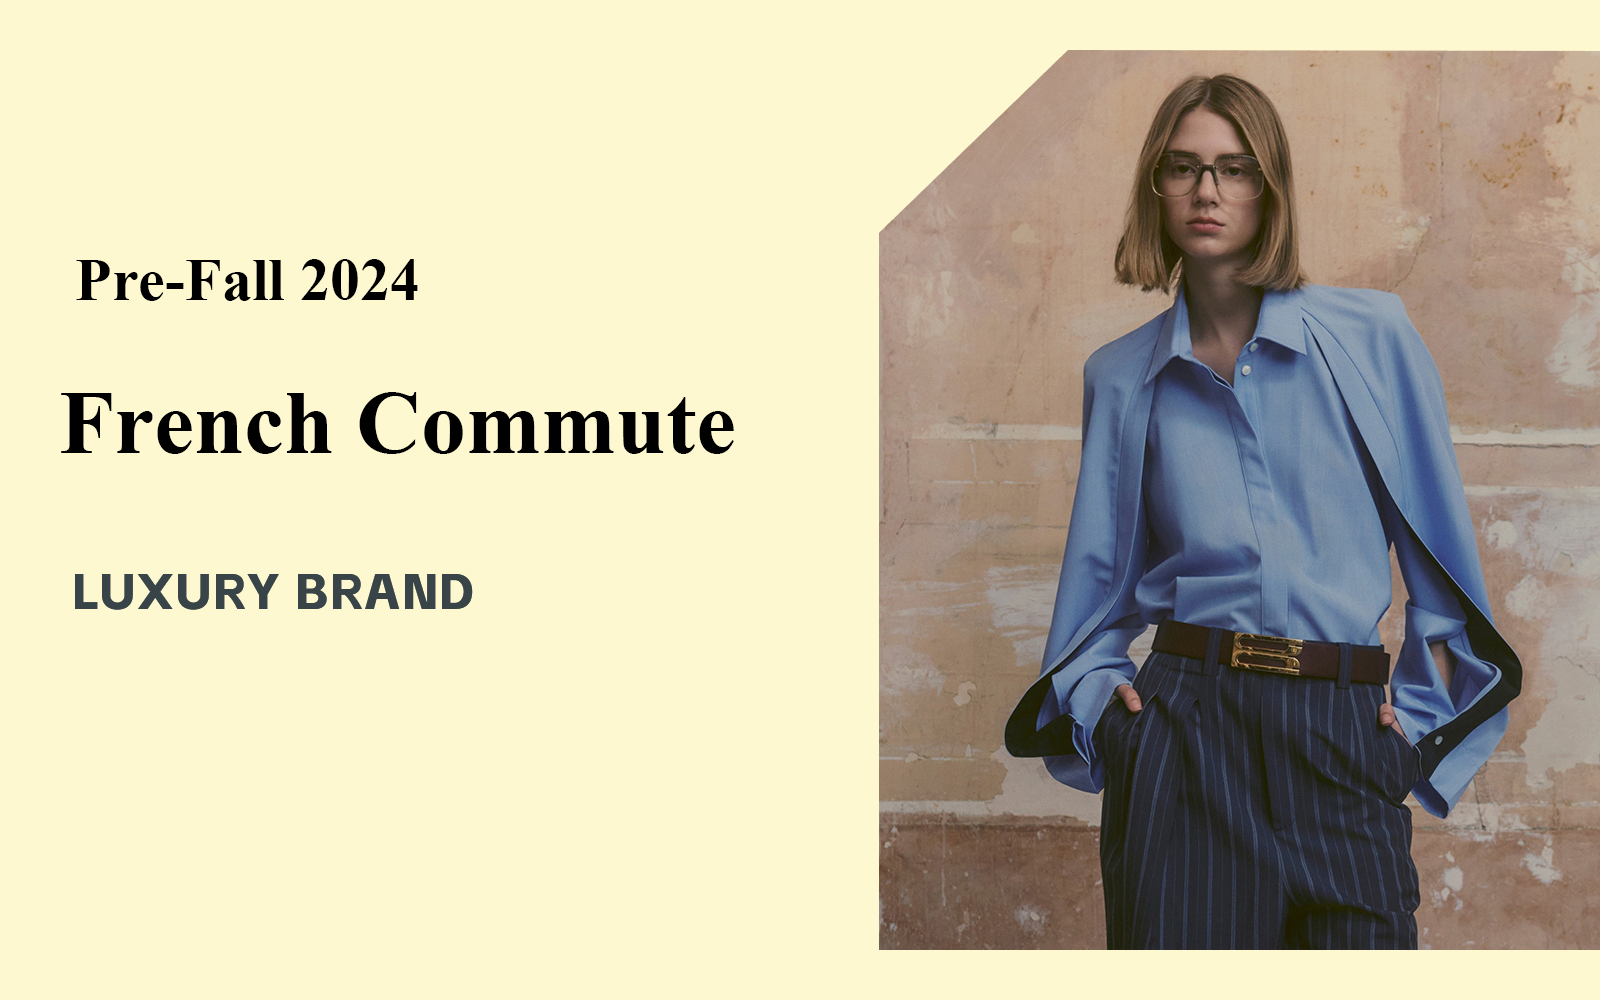 French Commute -- The Analysis of Luxury Brands